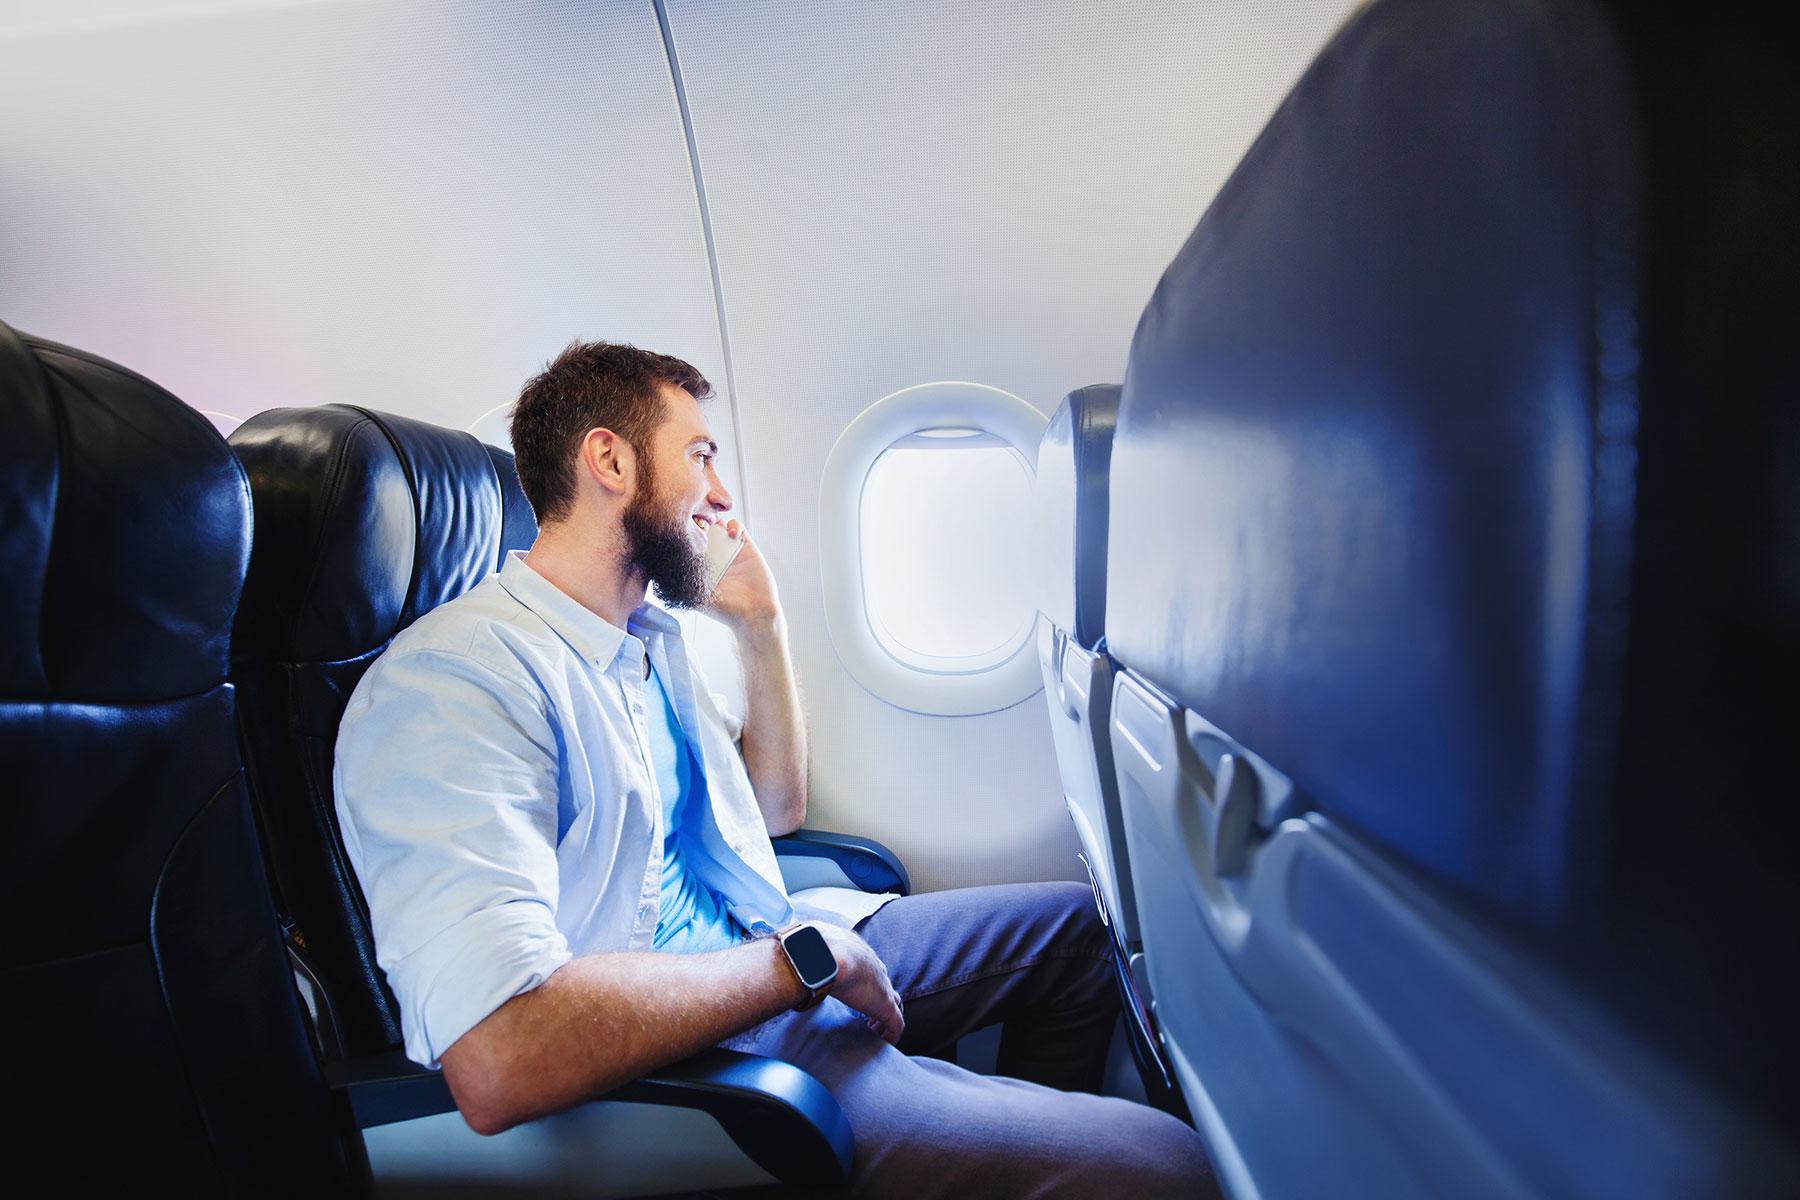 Annoying Things Passengers Do On Airplanes - 